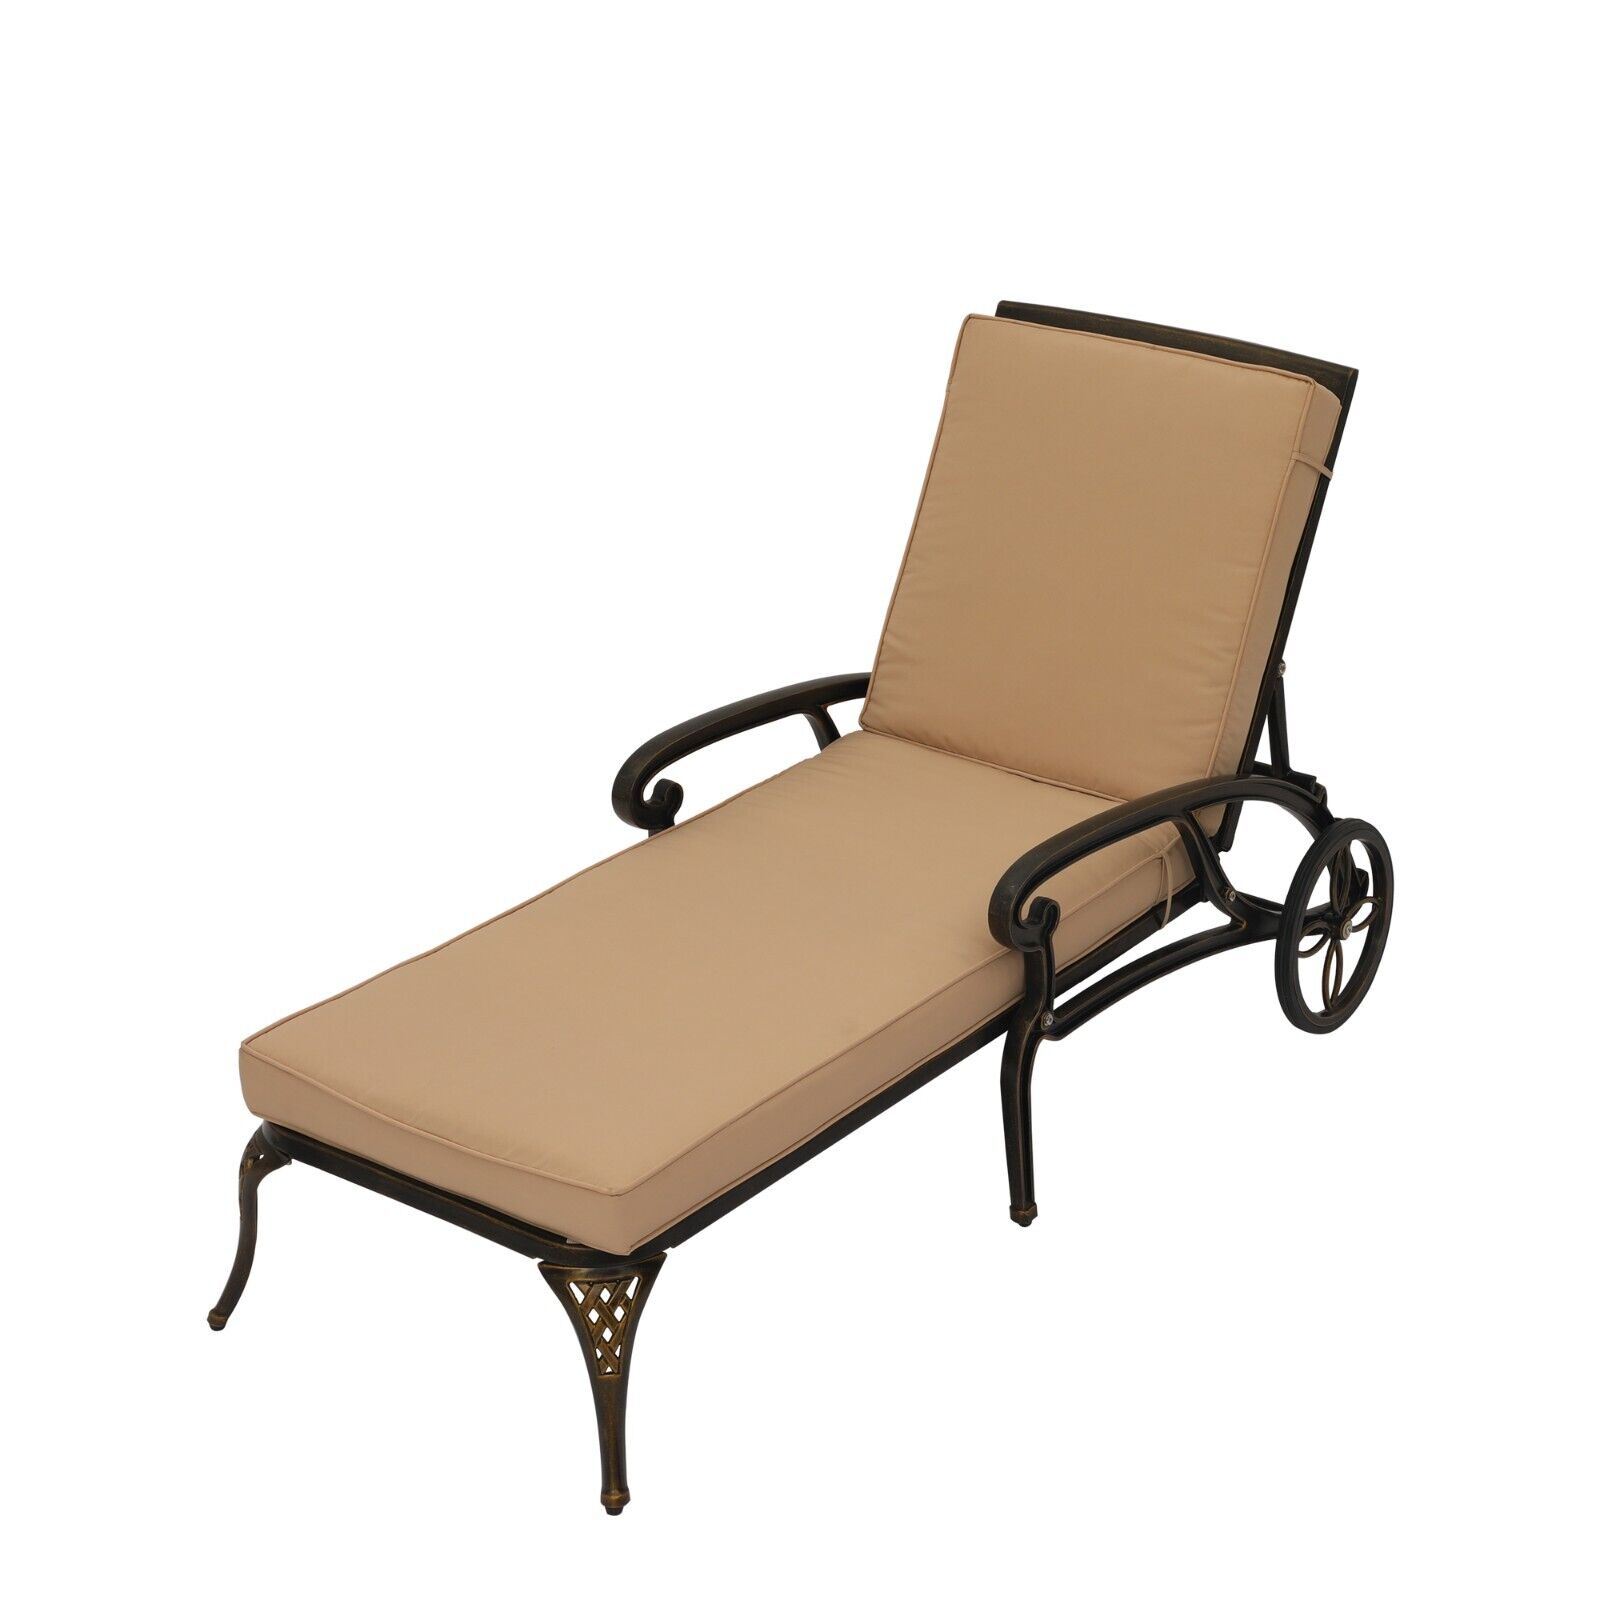 Clihome Cast Aluminum Chaise Lounge Adjustable Patio Reclining Chair w/ Cushion